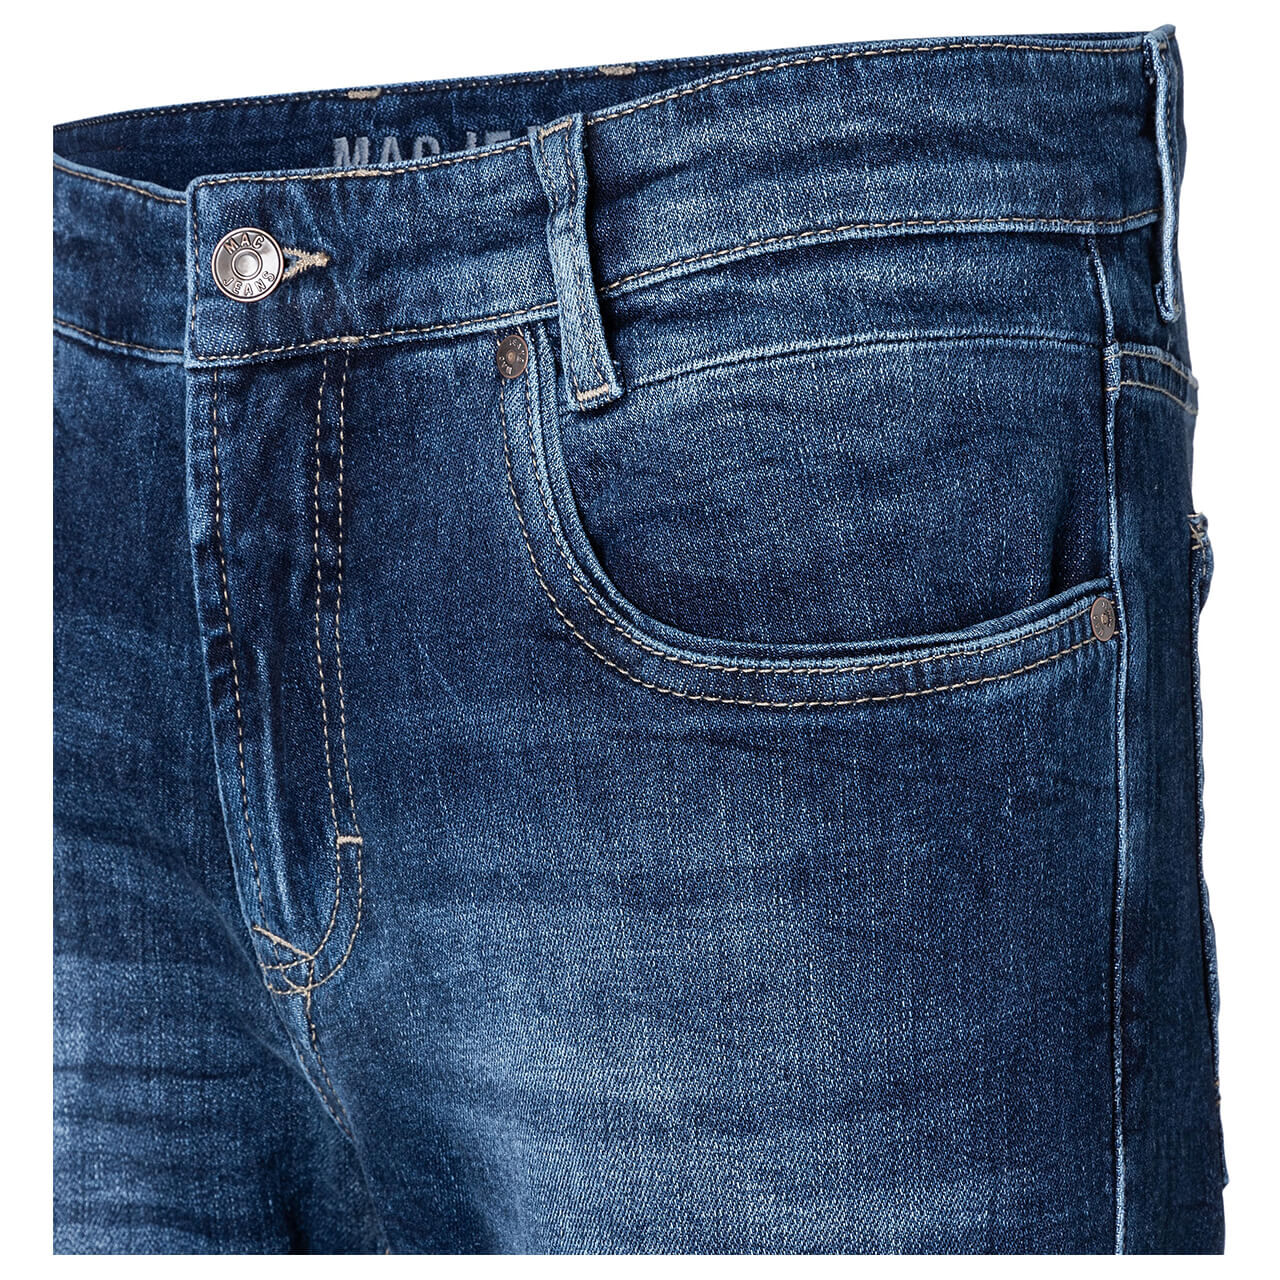 MAC Arne Pipe Jeans navy blue washed